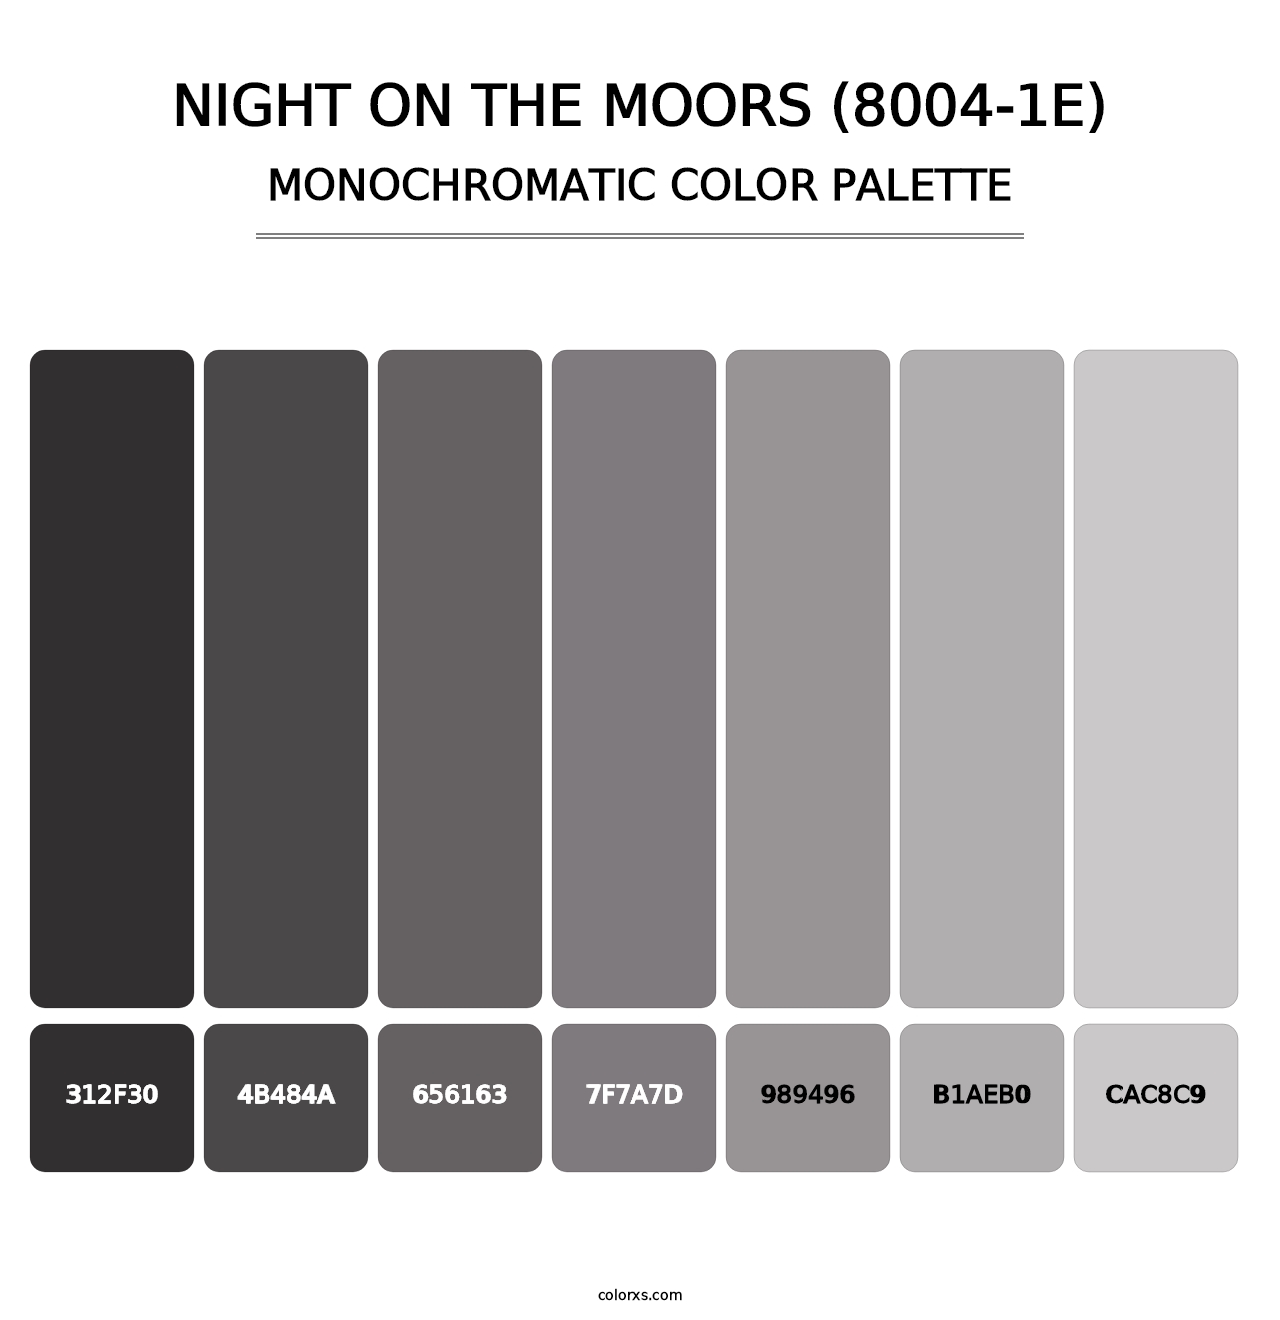 Night on the Moors (8004-1E) - Monochromatic Color Palette